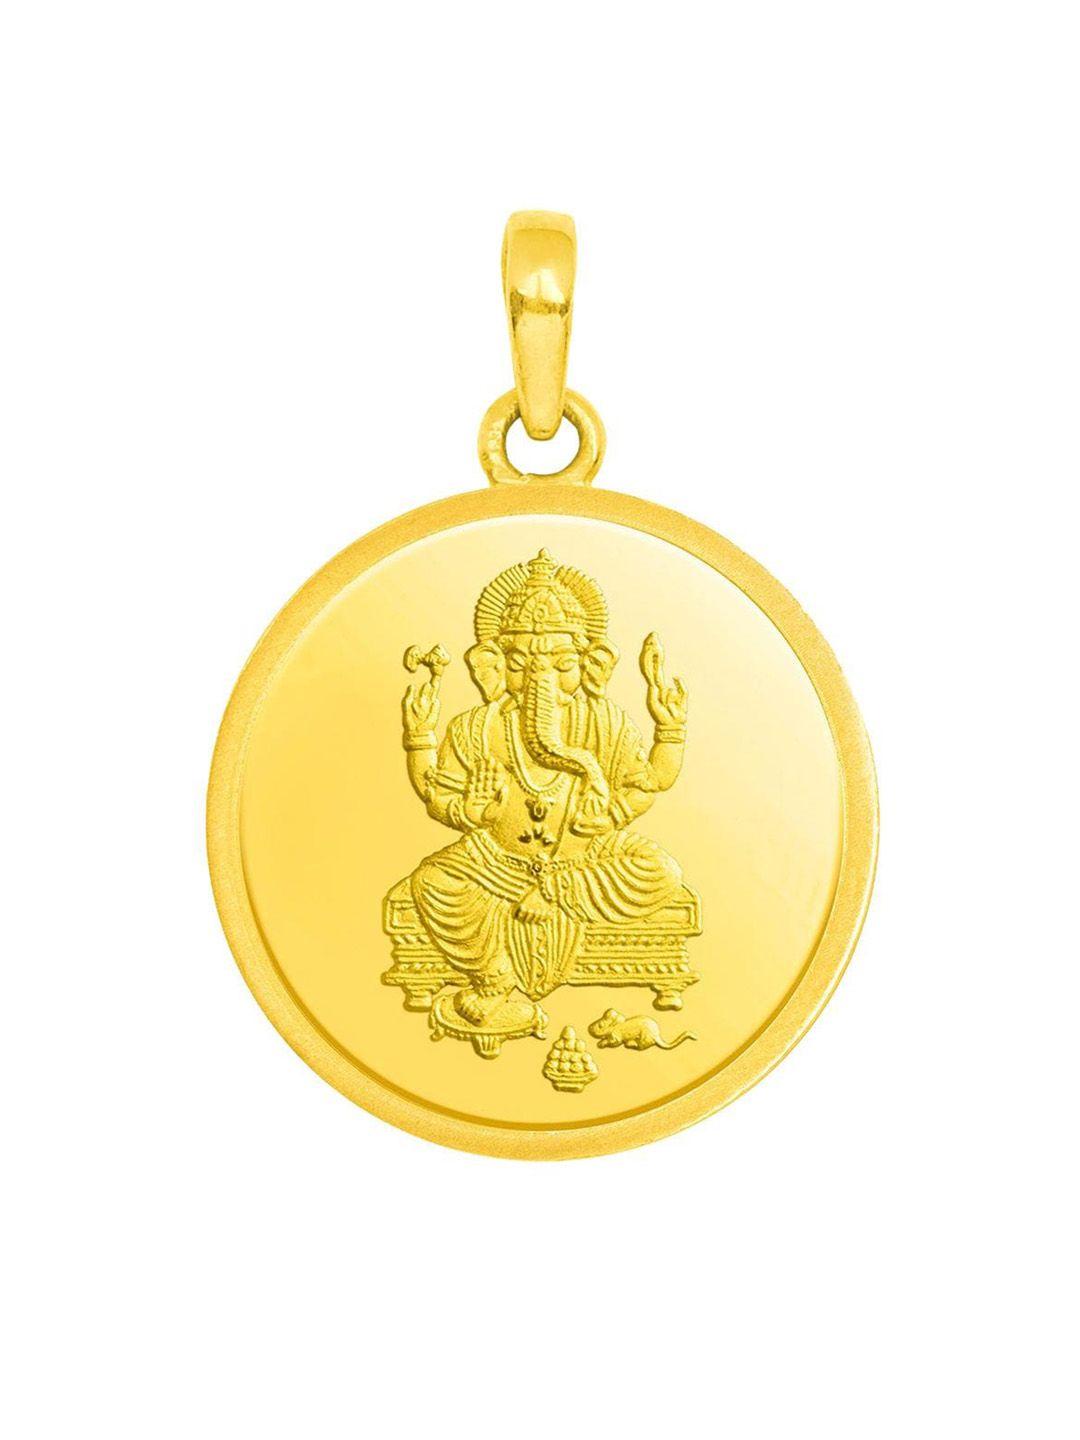 candere a kalyan jewellers company 24 kt gold ganesh coin pendant- 1 gm